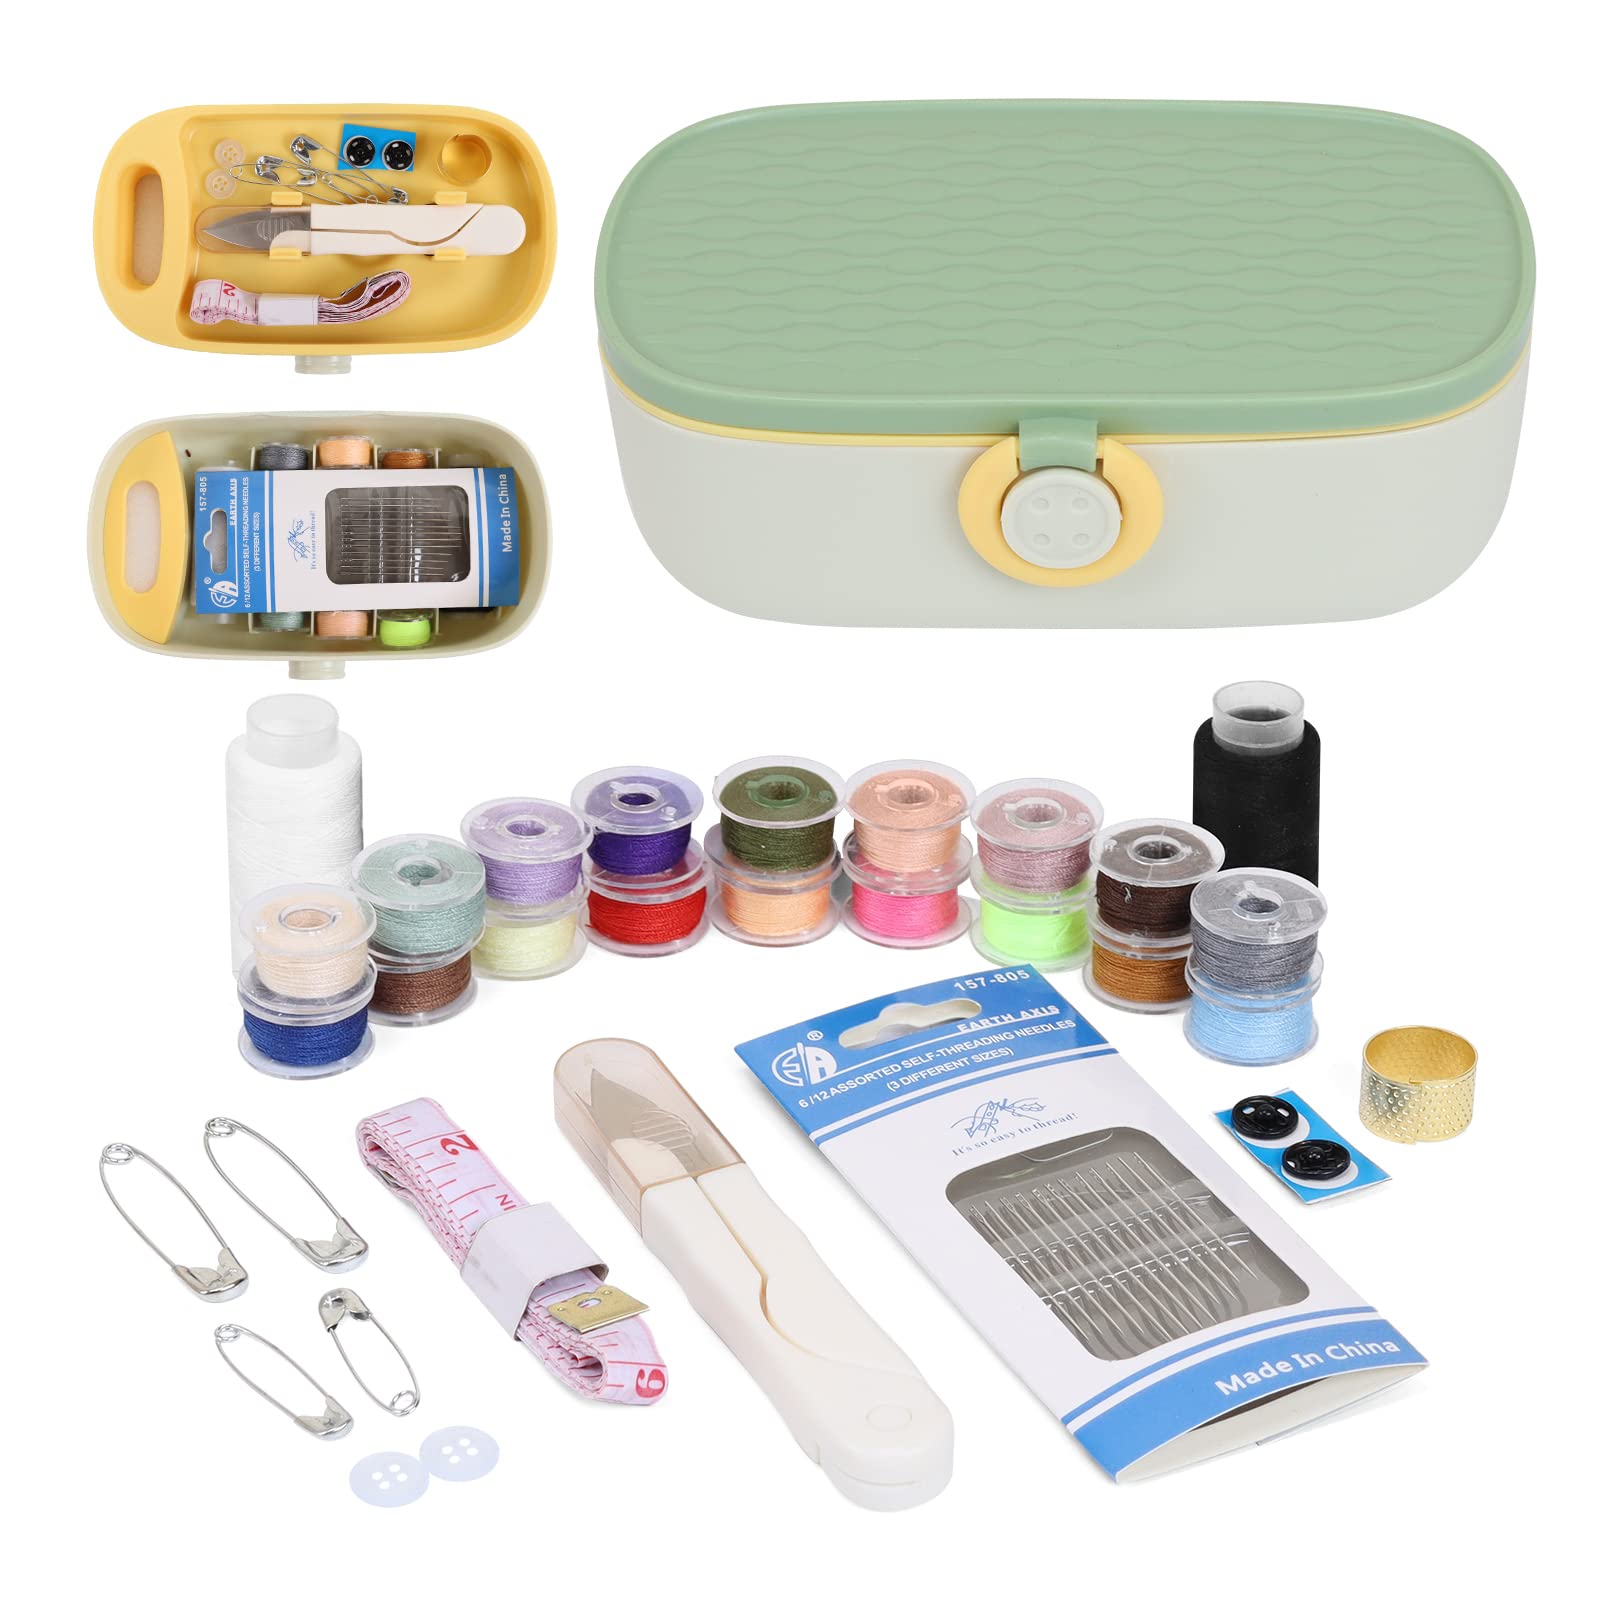 Sewing Kit,DIY Needle and Thread Kit with Sewing Supplies and